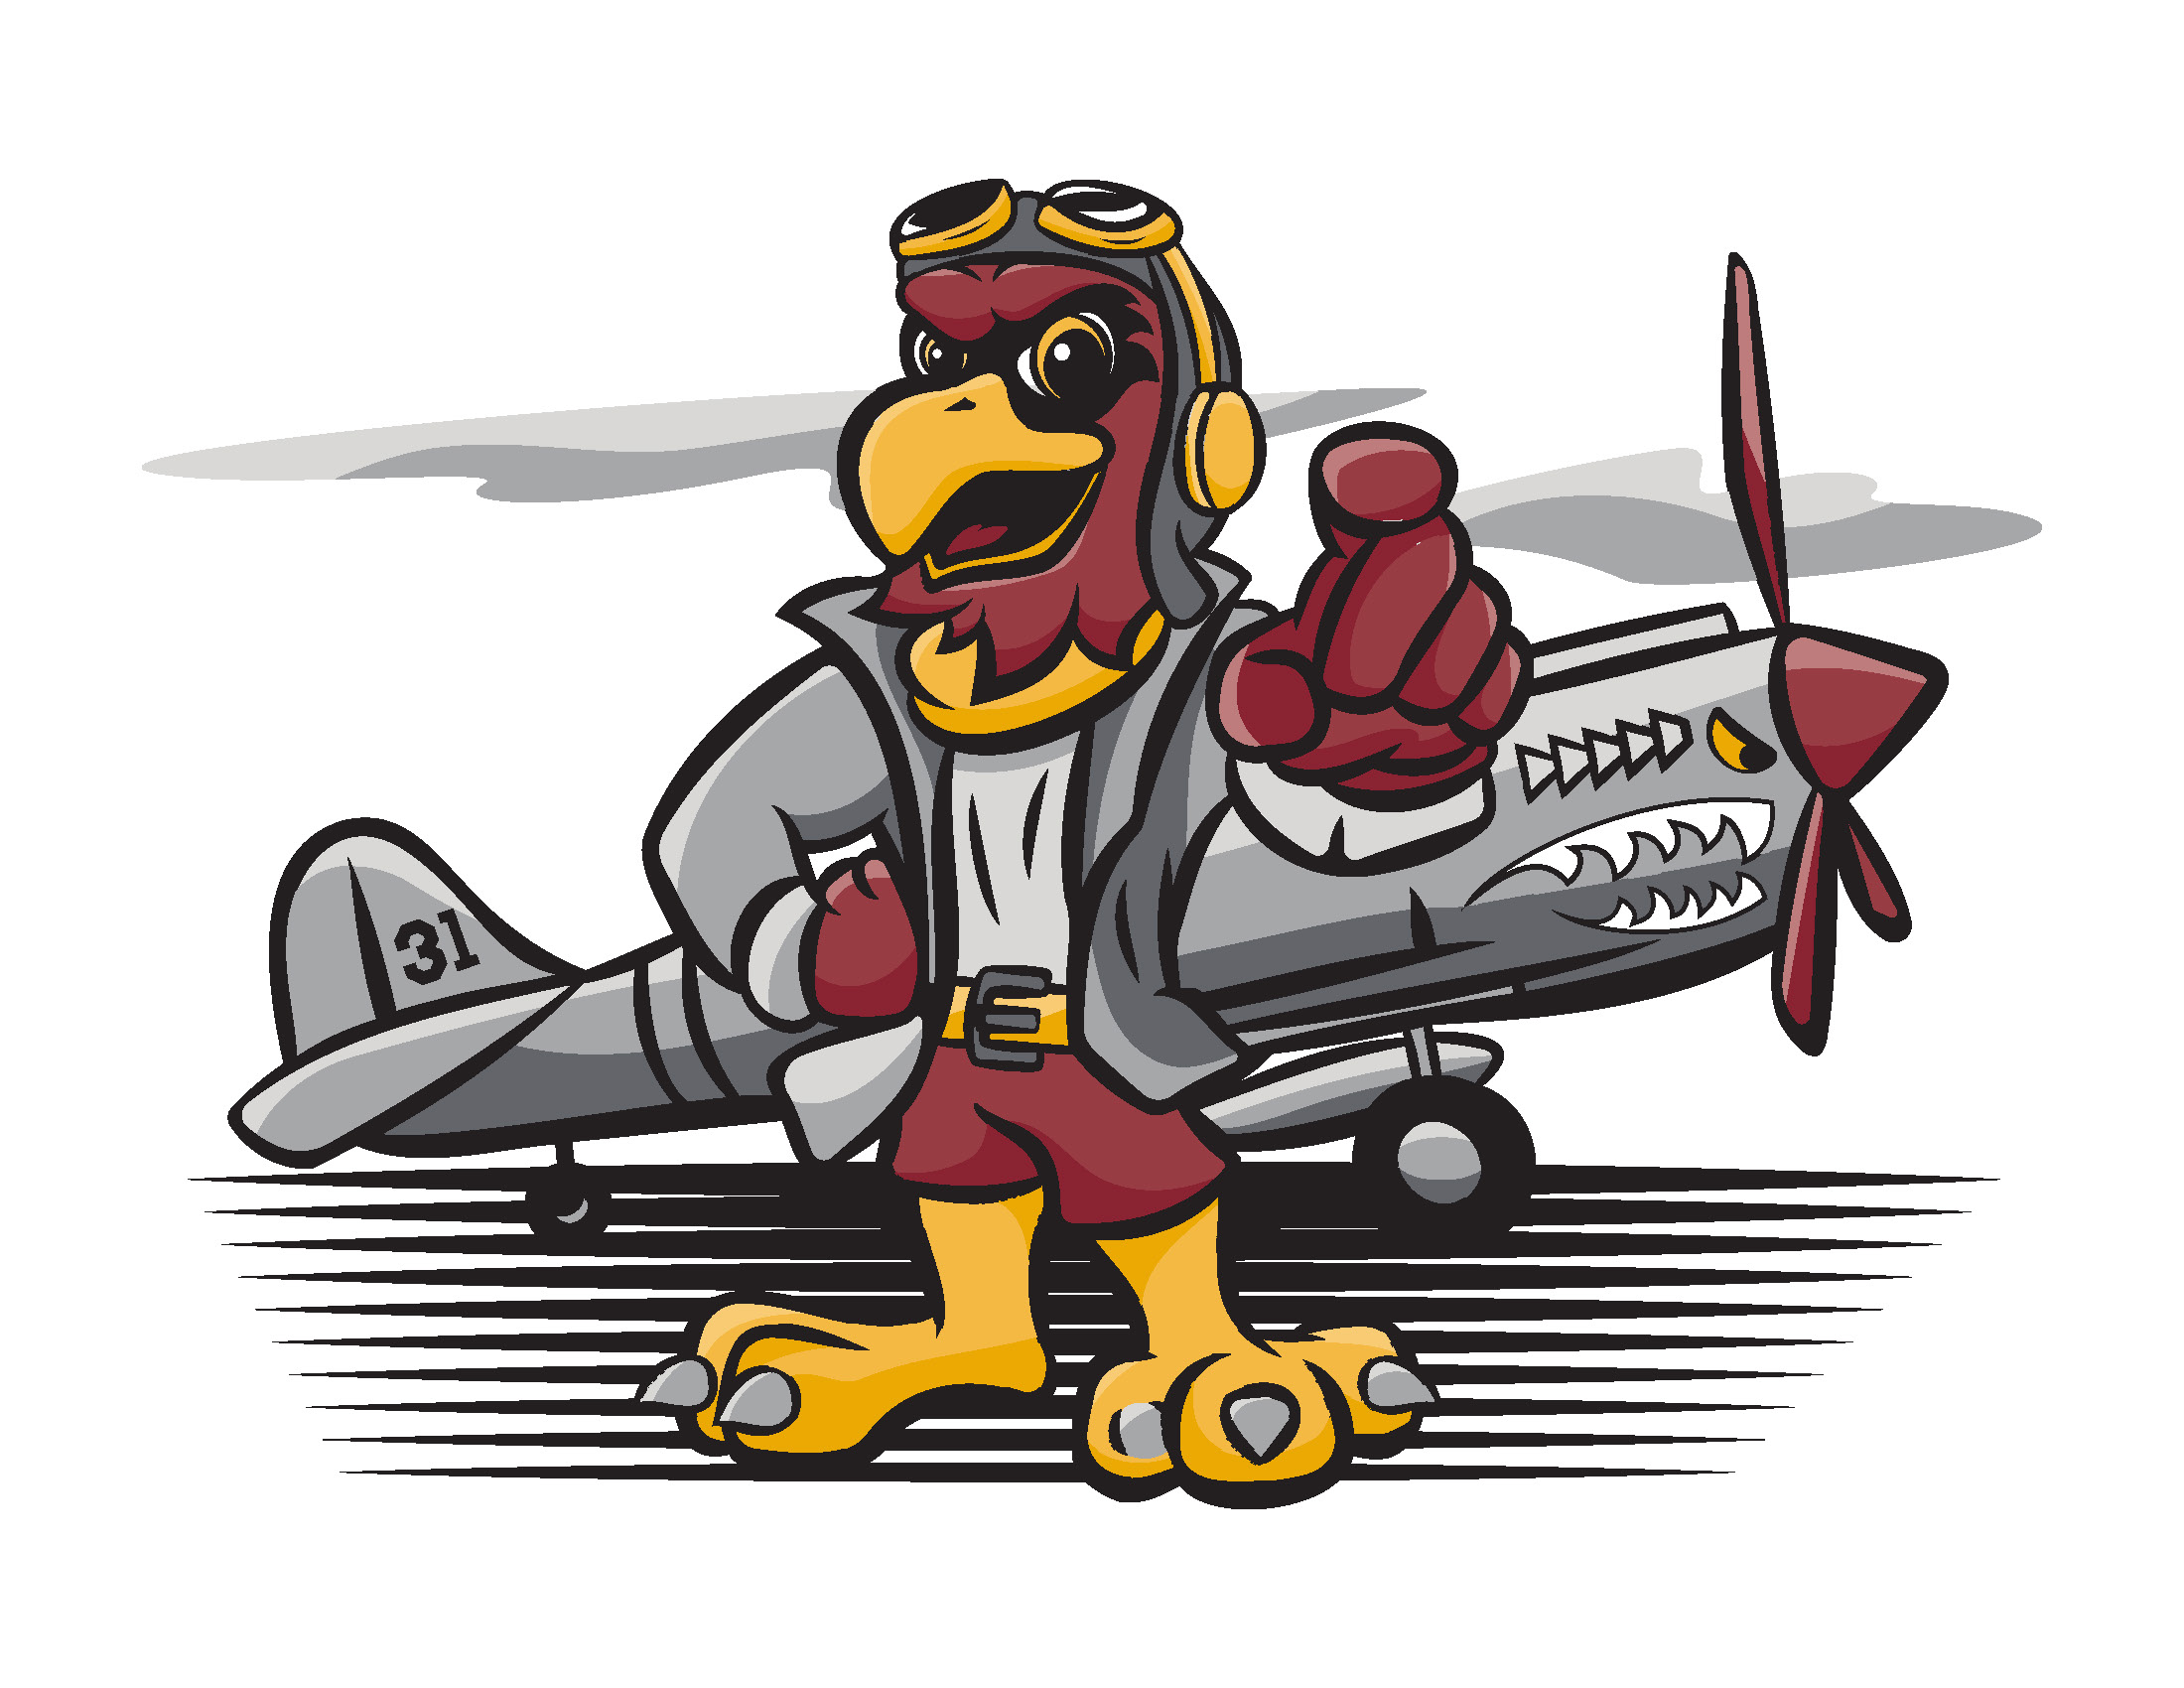 A cartoon drawing of Ace in front of a P-40 Warhawk.